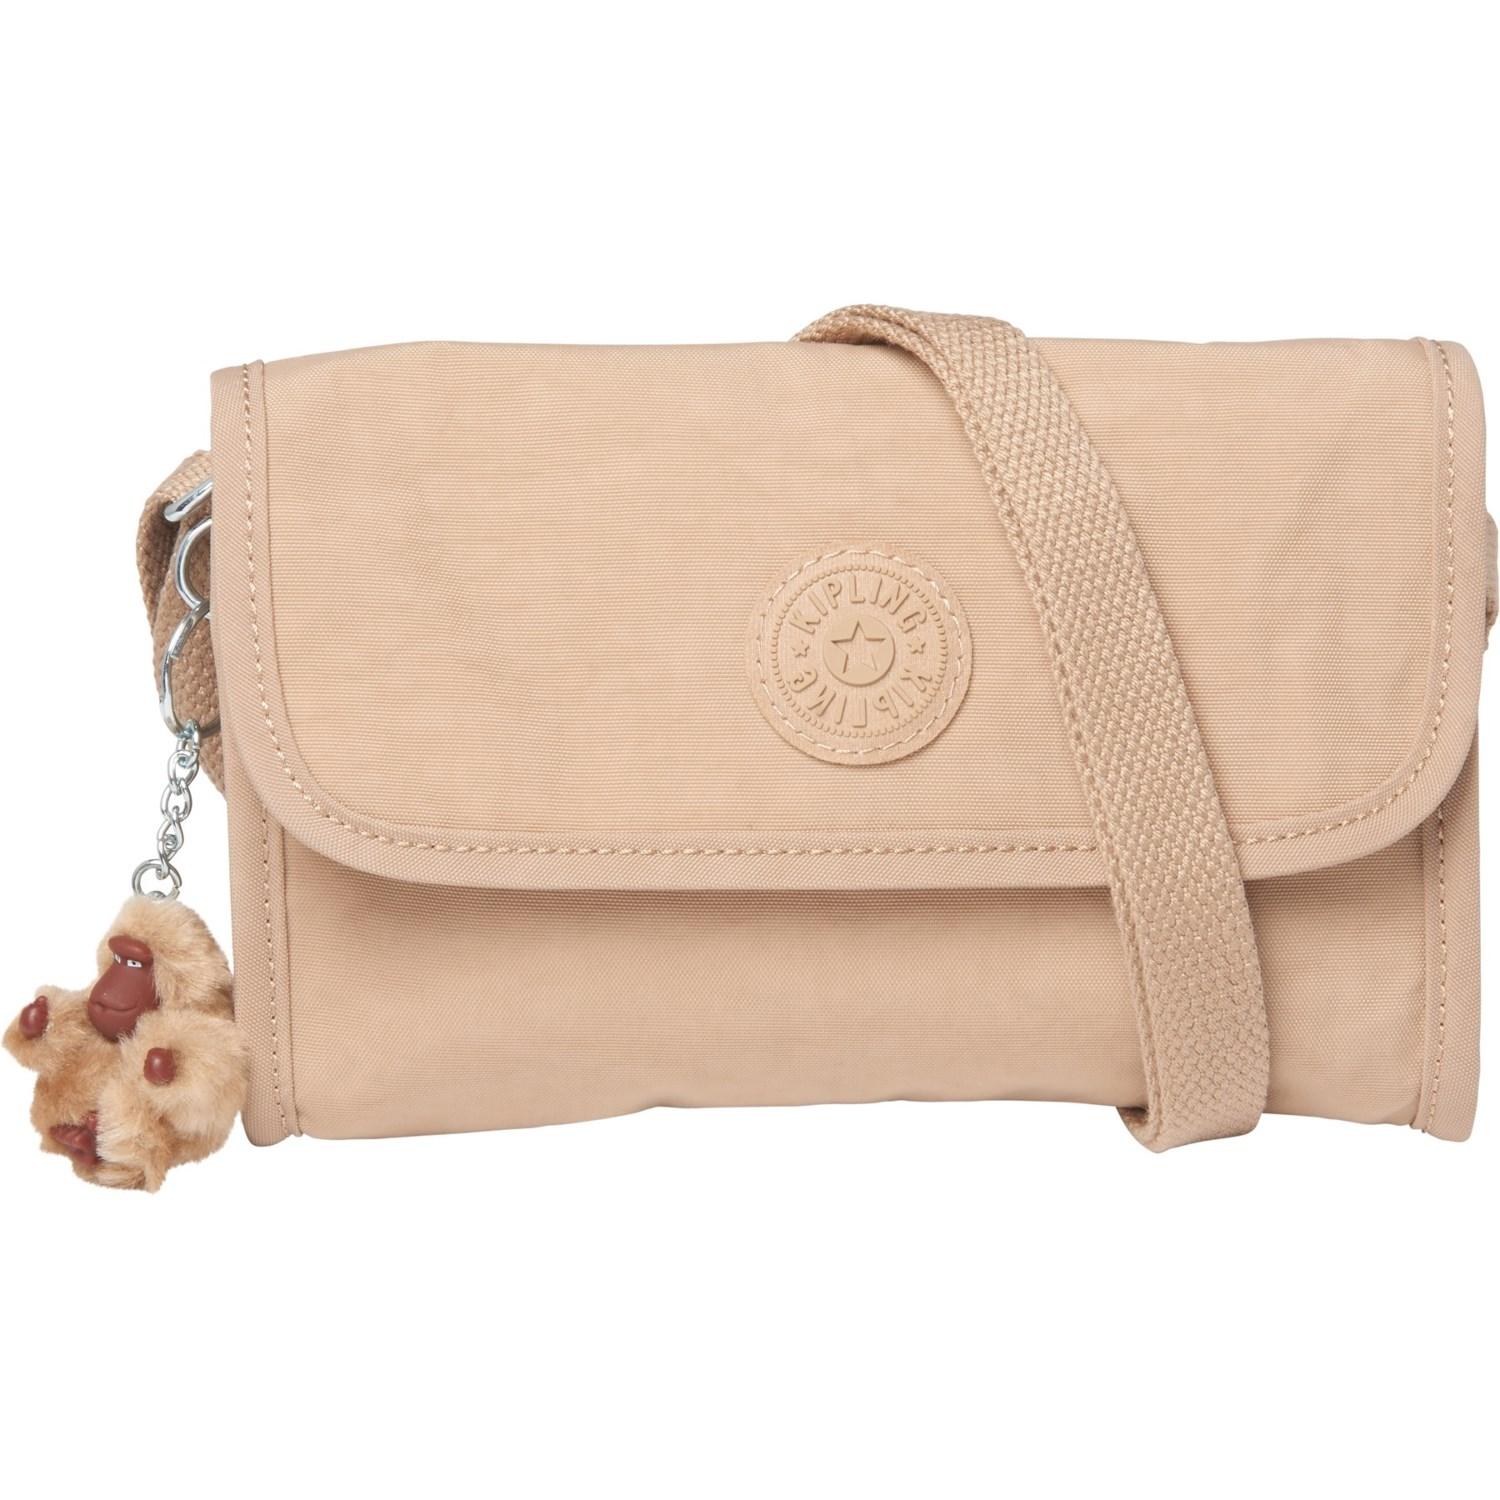 Kipling Berry Small Crossbody Bag With Adjustable Strap in Natural | Lyst